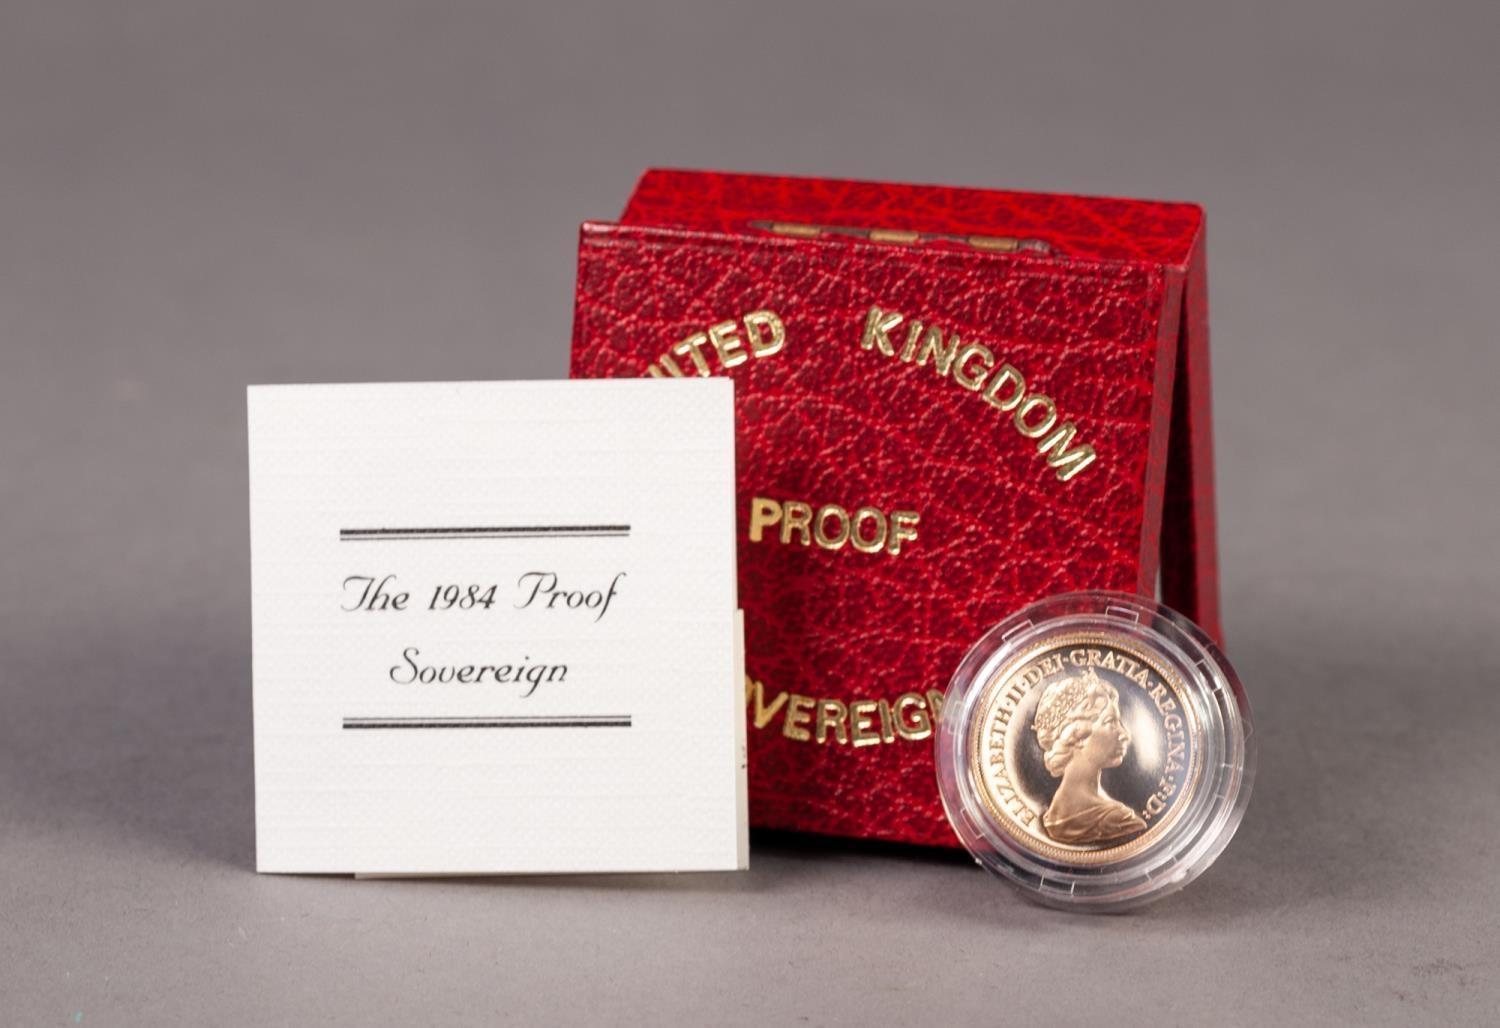 ROYAL MINT CASED AND ENCAPSULATED ELIZABETH II GOLD PROOF SOVEREIGN 1984 (VF)in hard red case with - Image 4 of 4